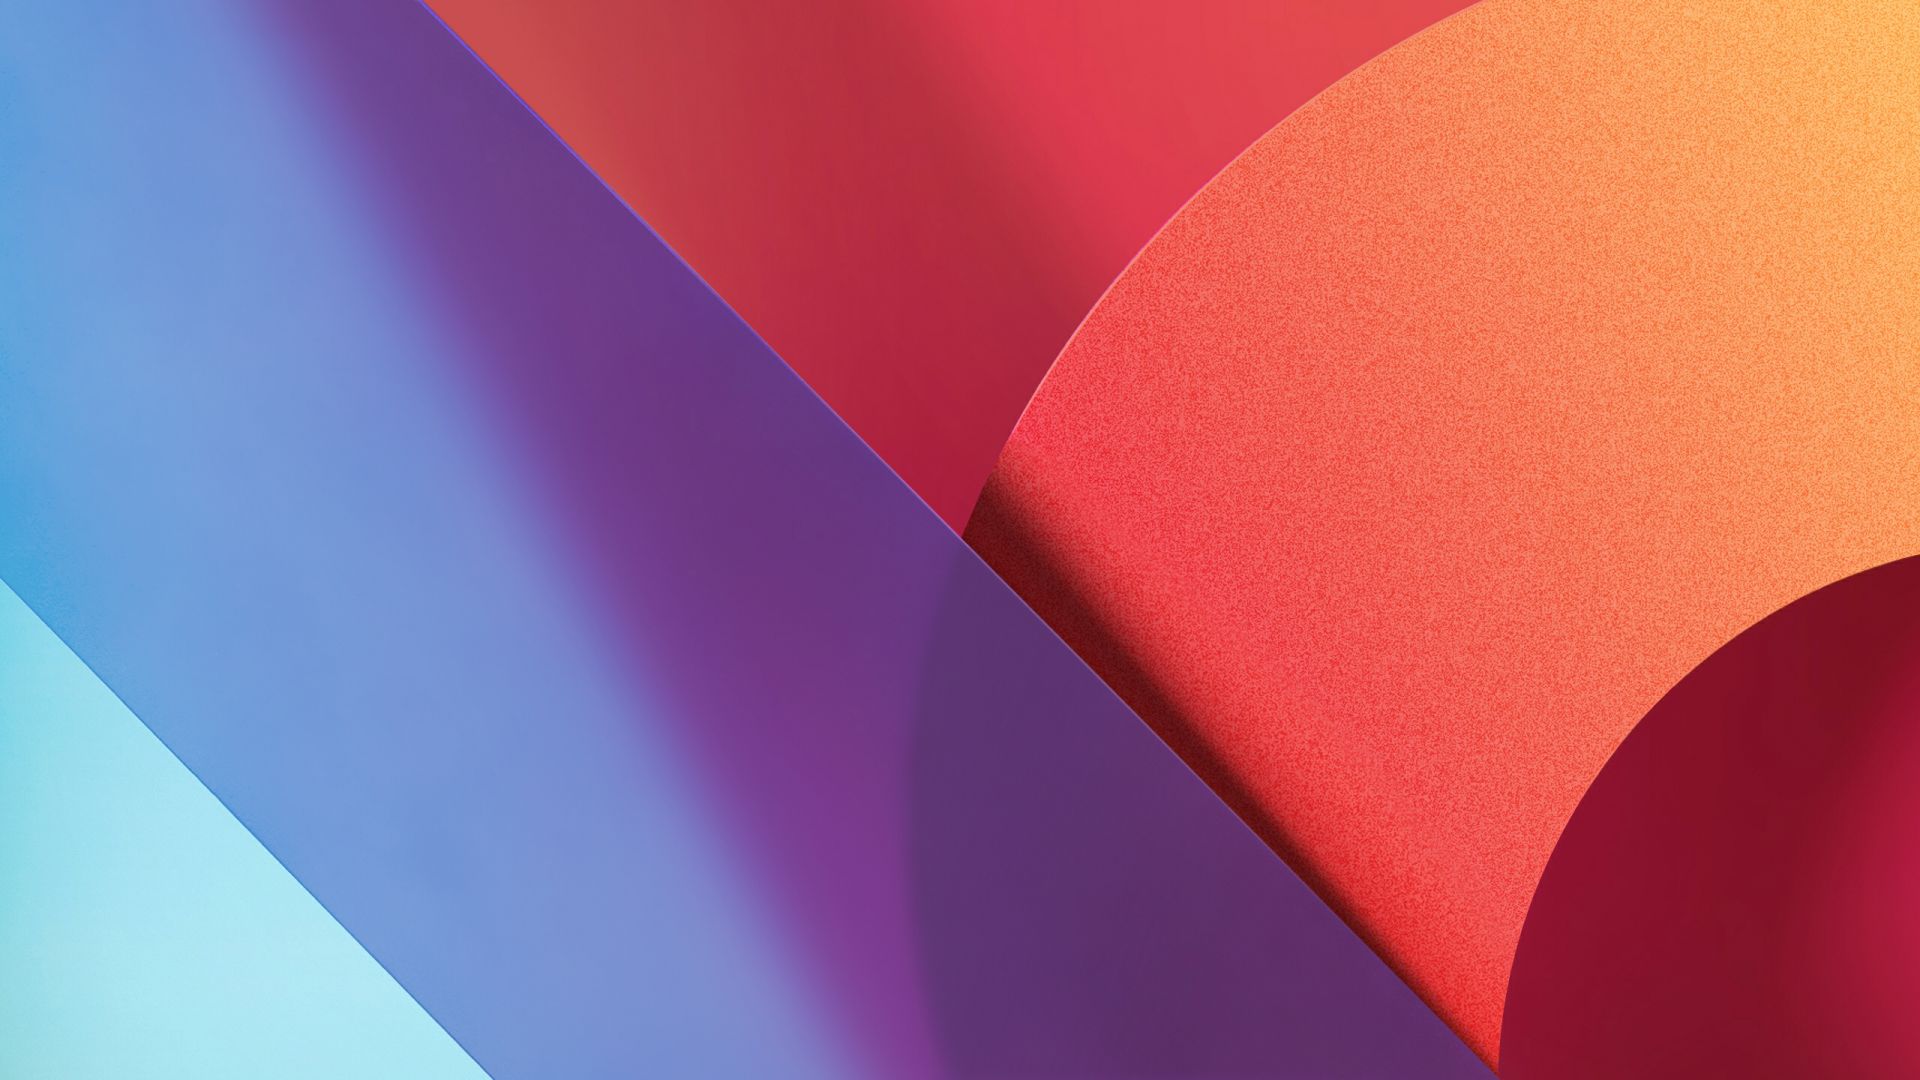 Wallpaper Abstract, material design